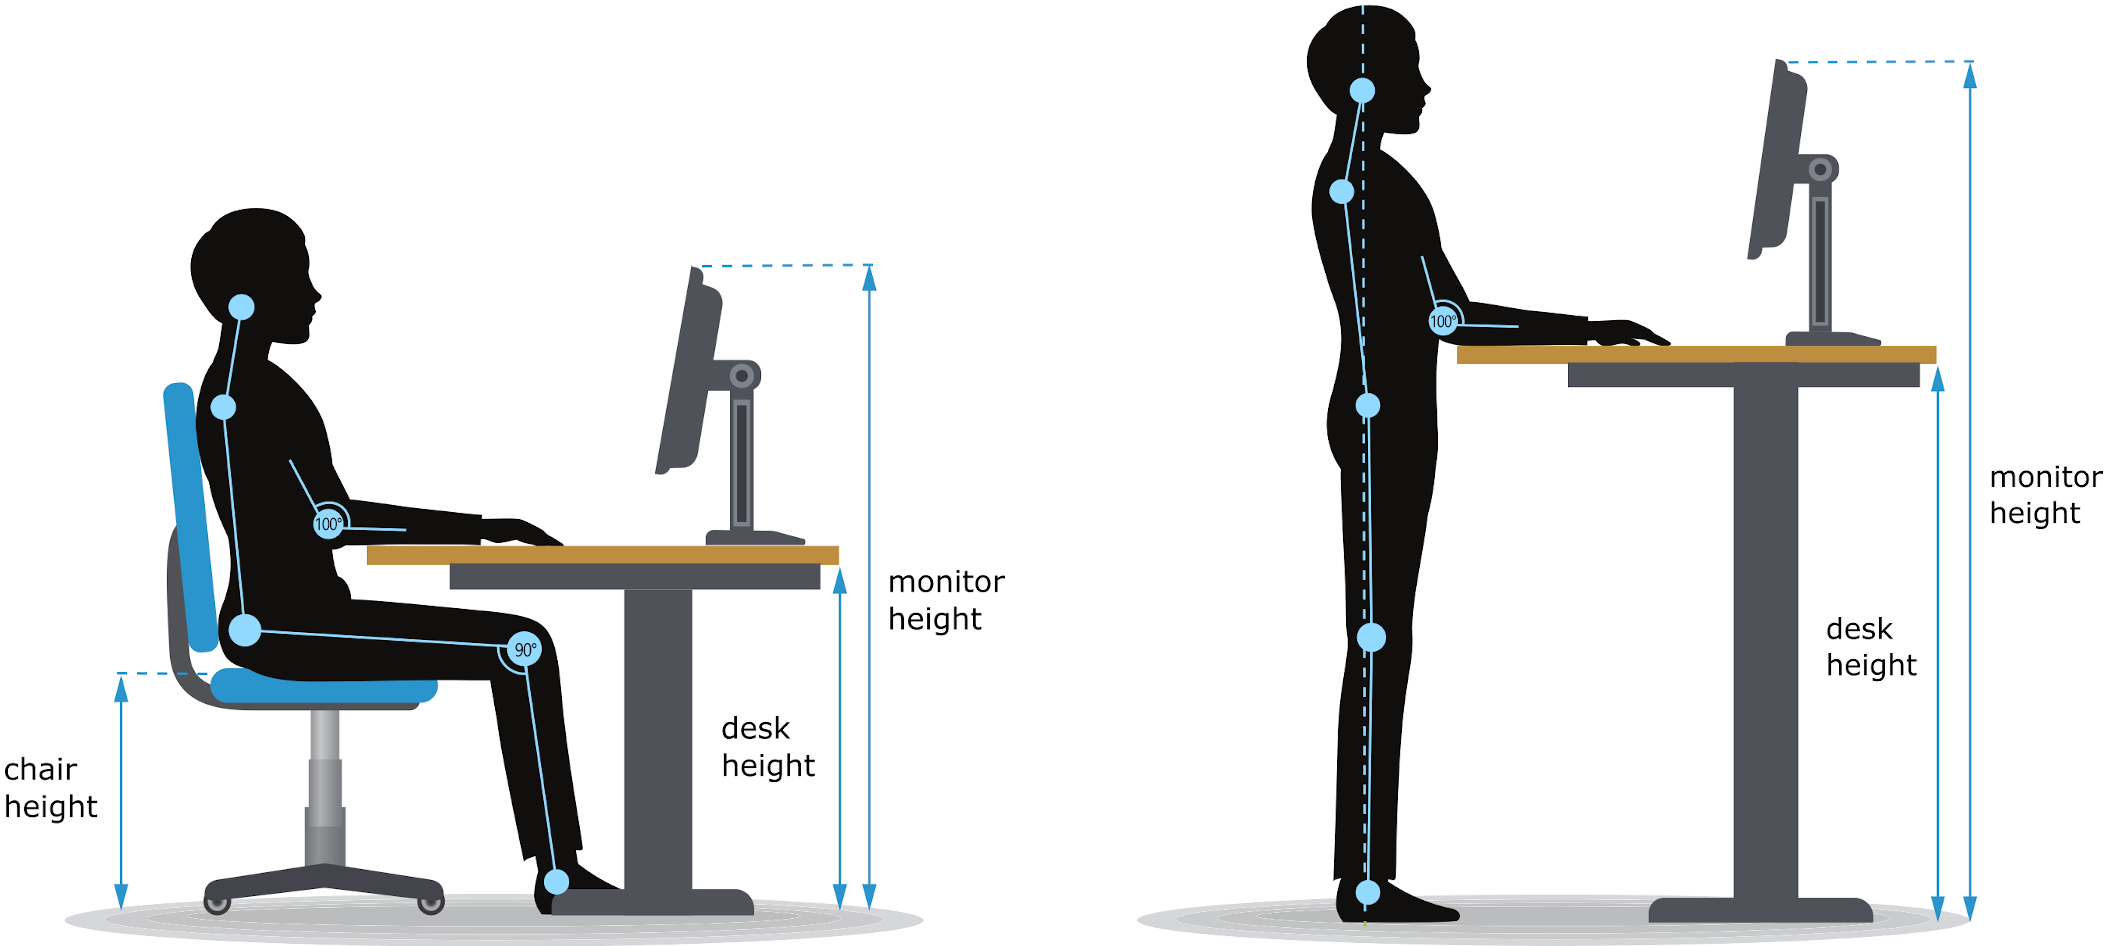 Diagram showing the key measurements to find the ergonomic desk height